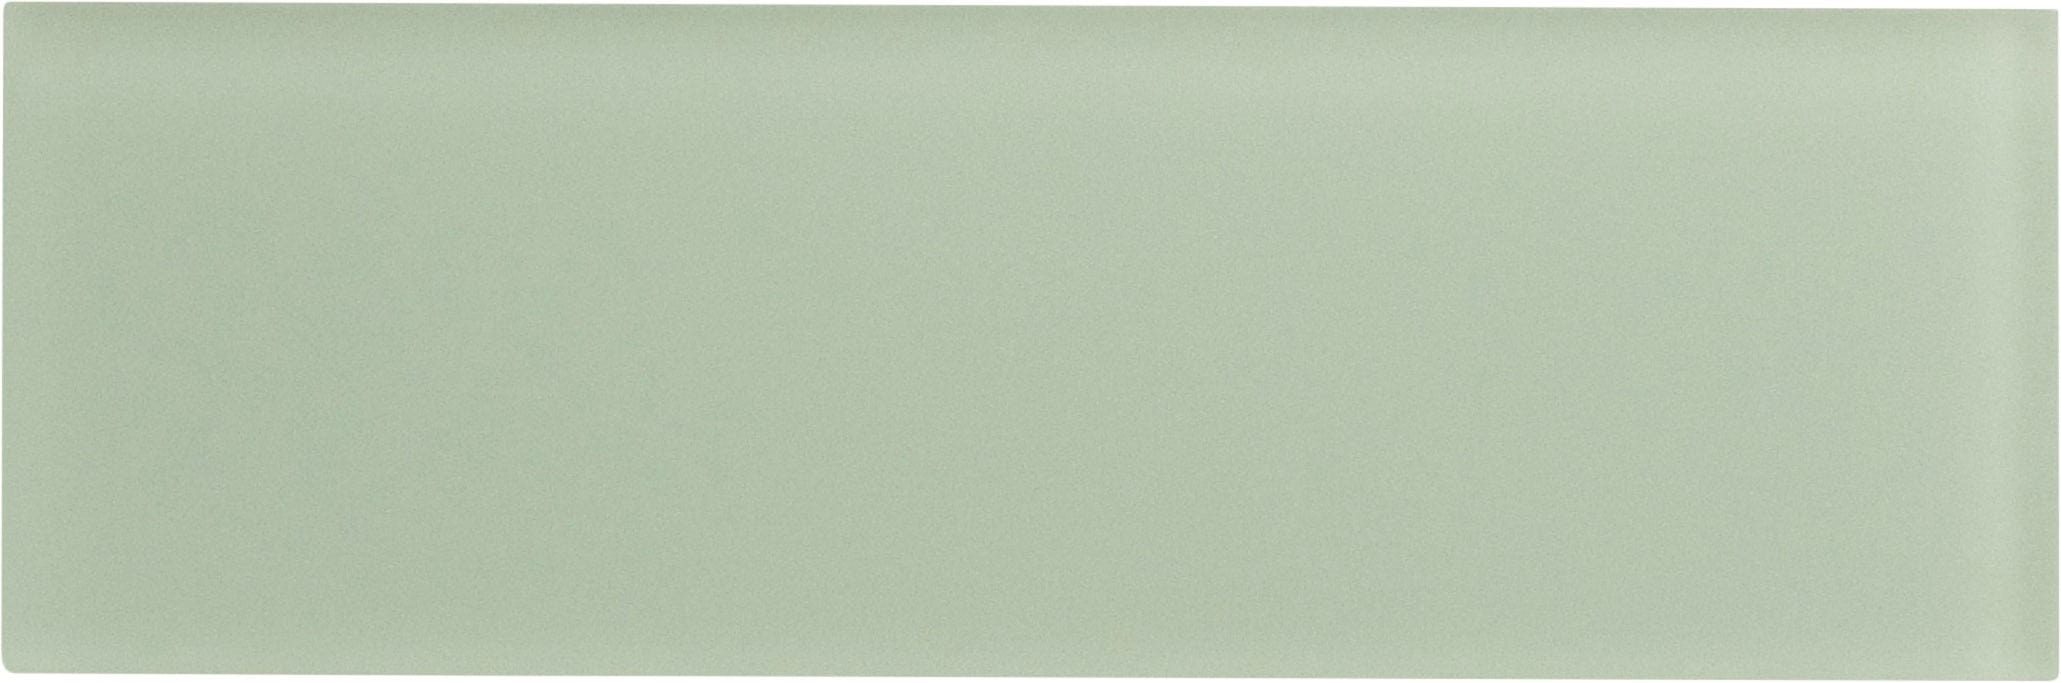 Ice Mist Matte Green 4'' x 12'' Frosted Glass Subway Tile Euro Glass